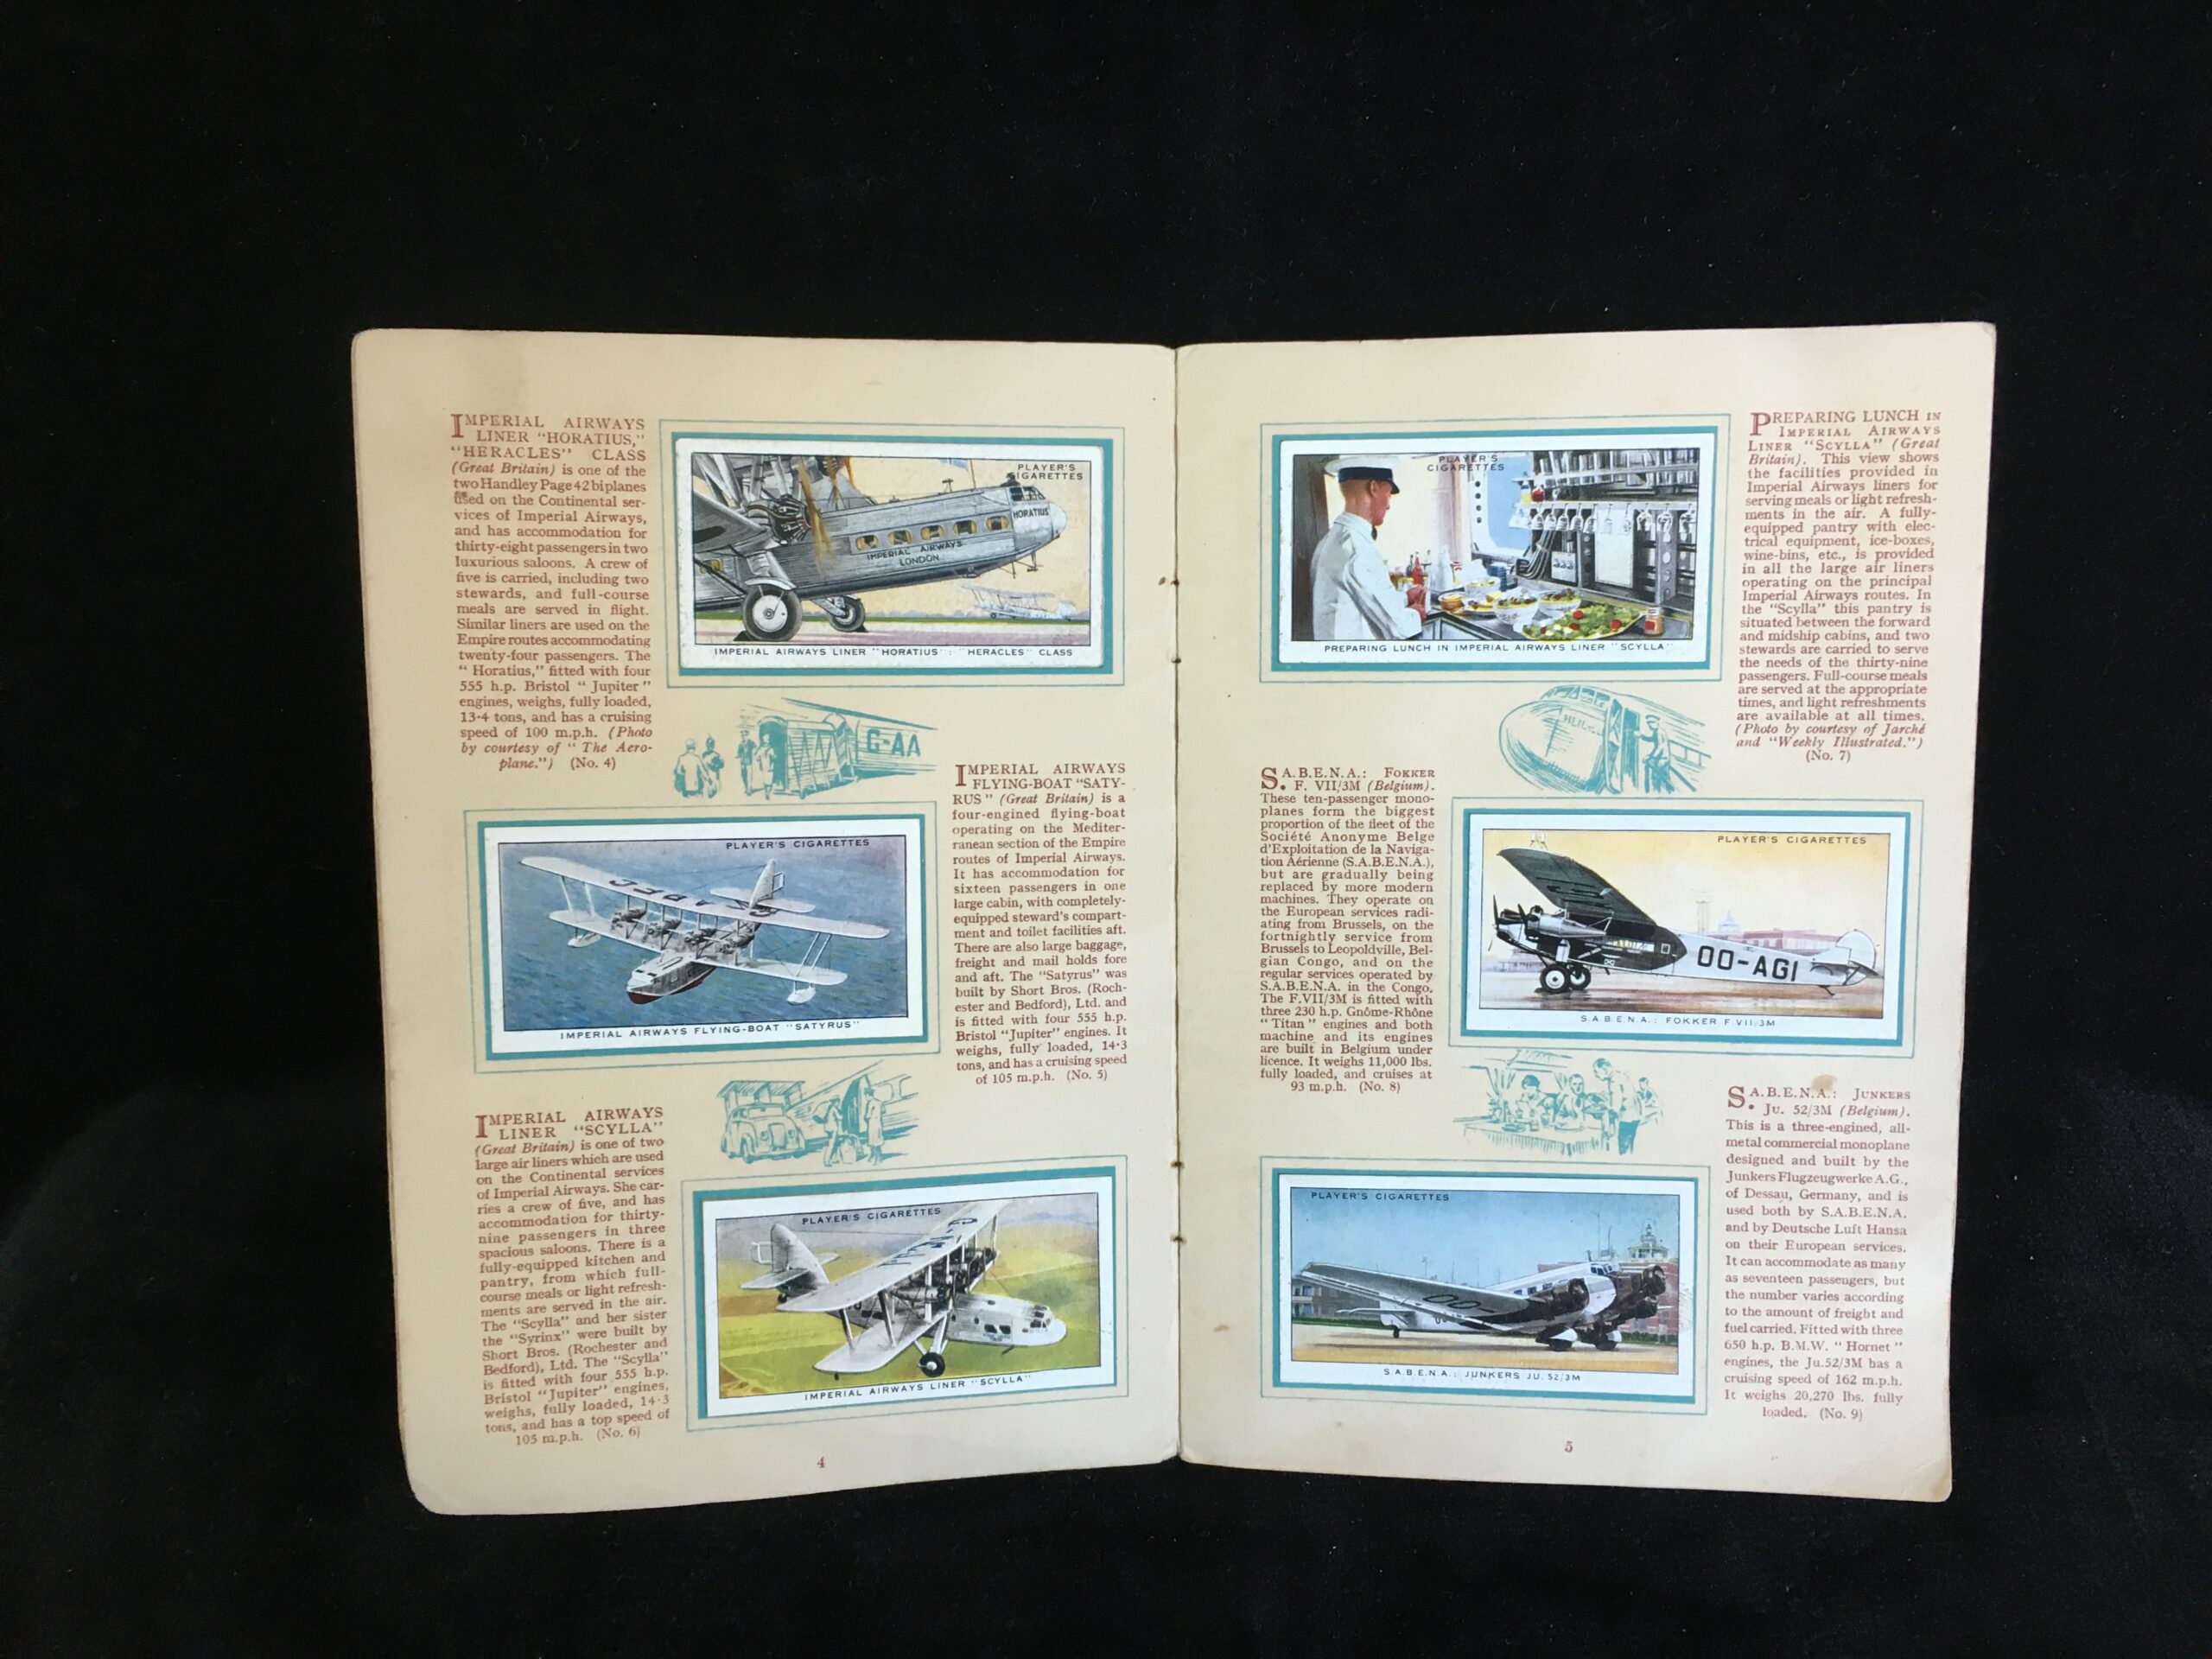 International Air Liners - 1936 - Cigarette cards | Trade cards | Coins ...